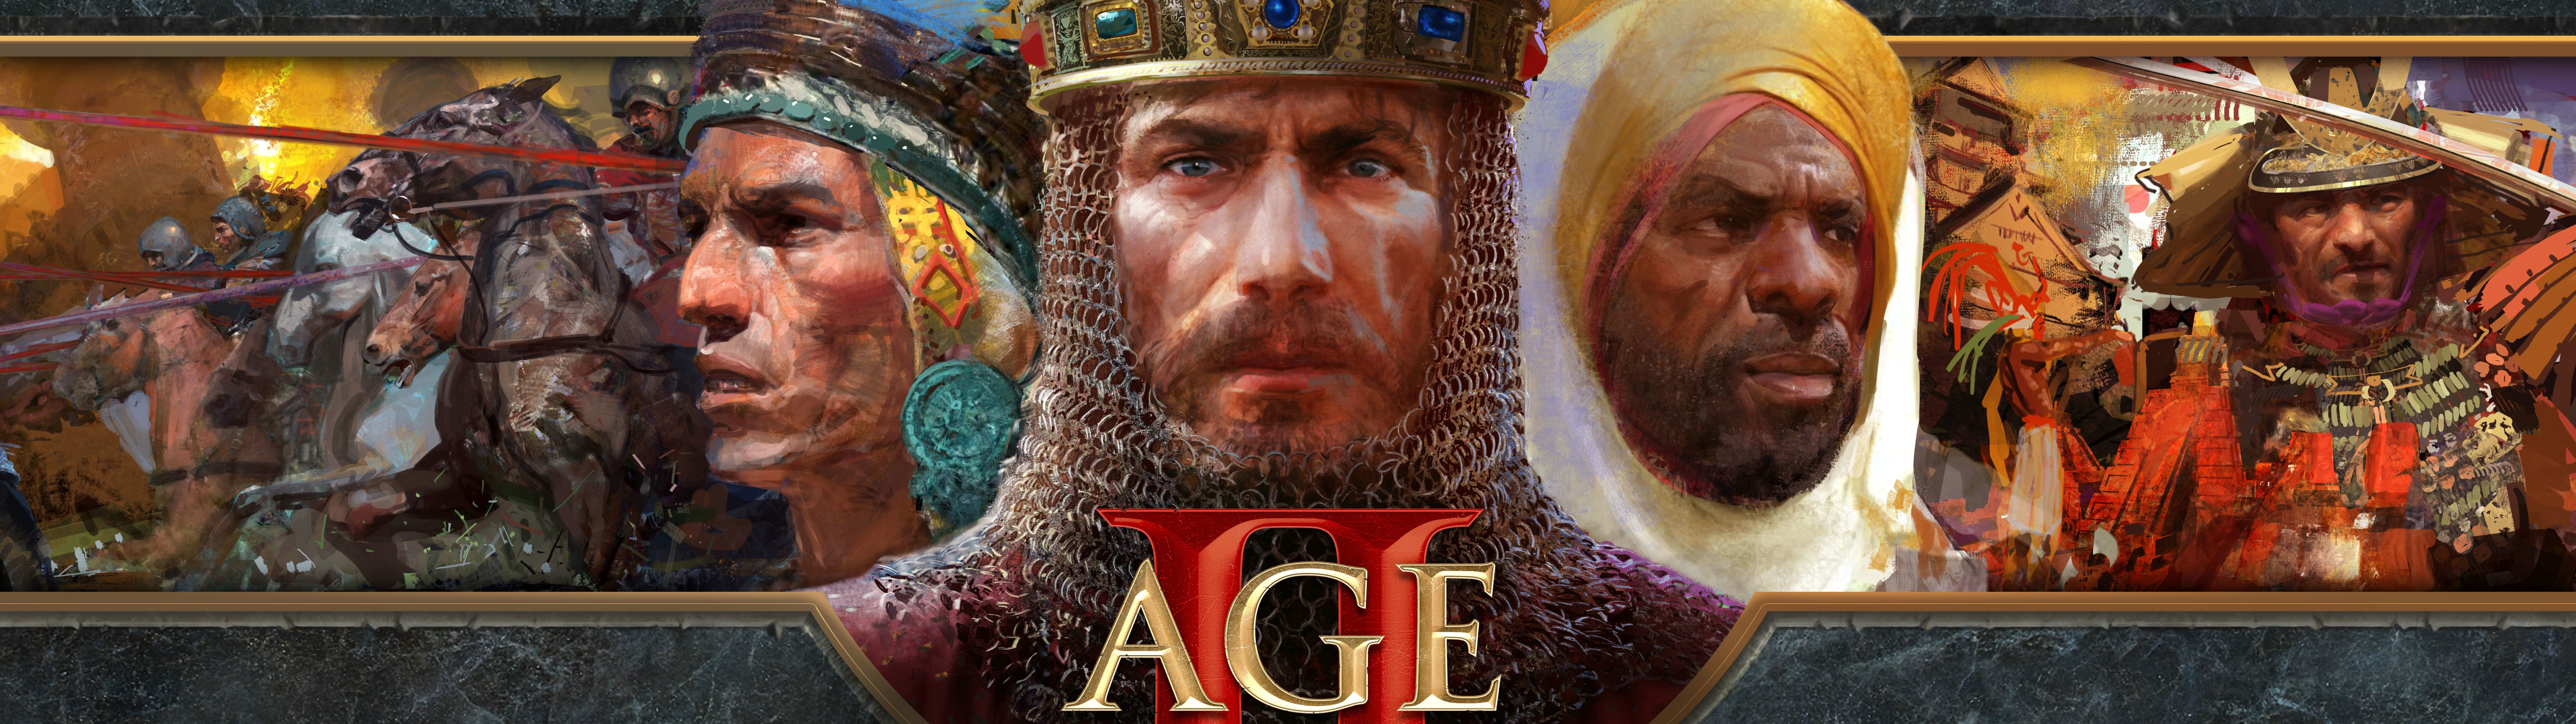 Age Of Empires II: The Age Of Kings wallpapers, Video Game, HQ Age Of  Empires II: The Age Of Kings pictures | 4K Wallpapers 2019